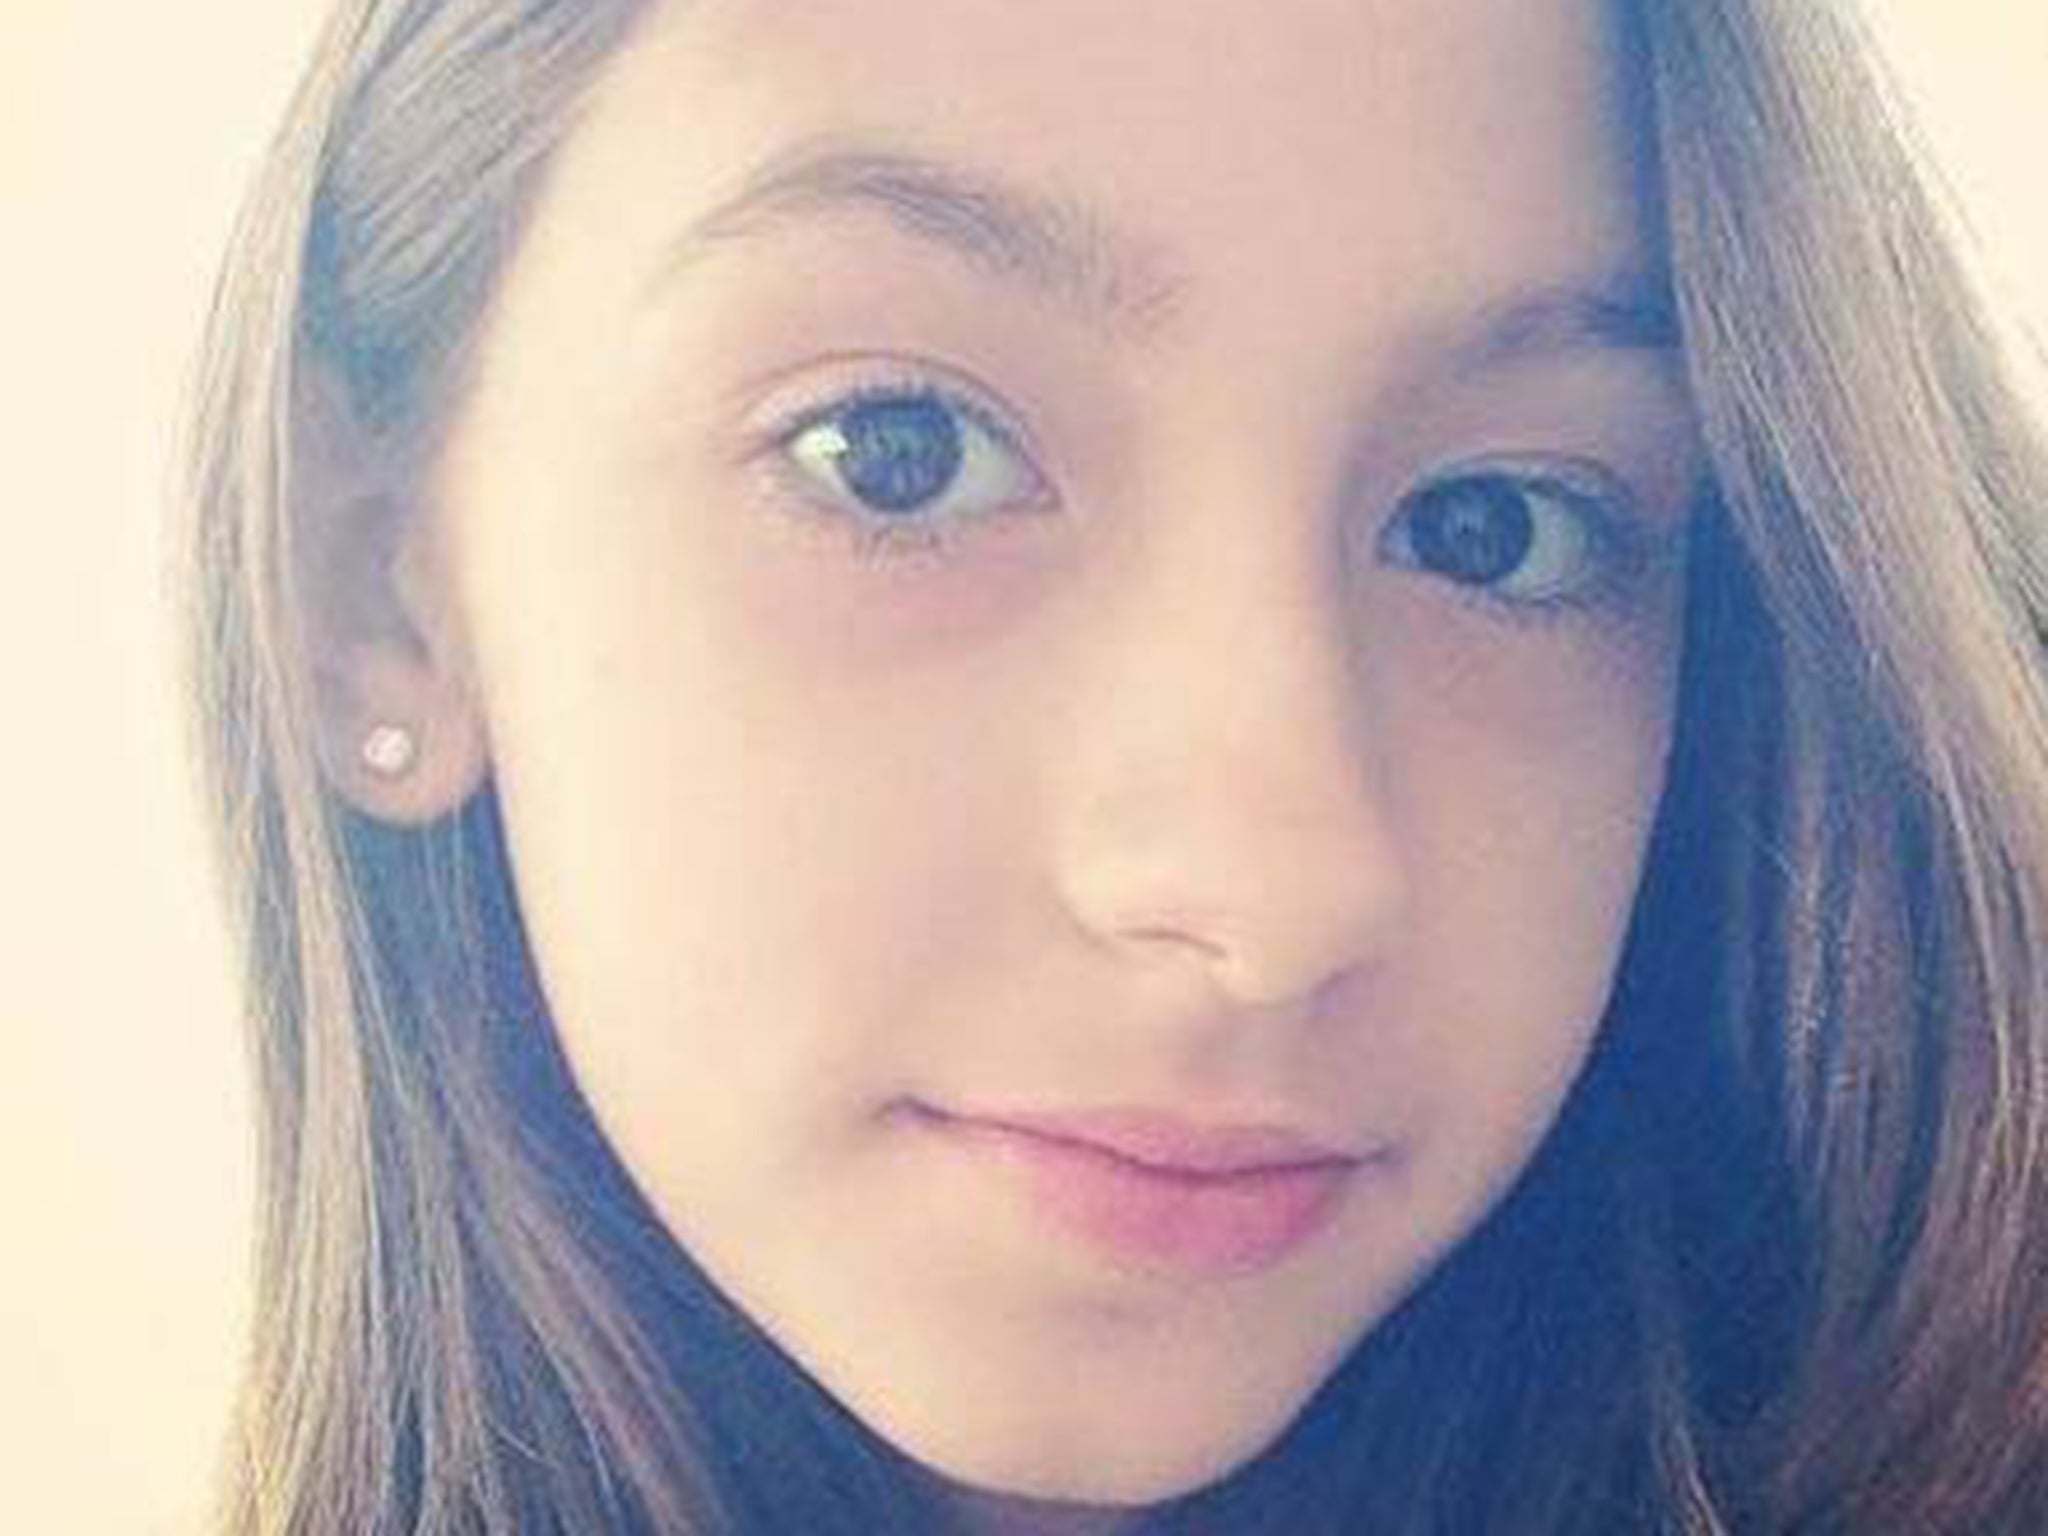 Ciara, 12, was shot dead by police during an eviction